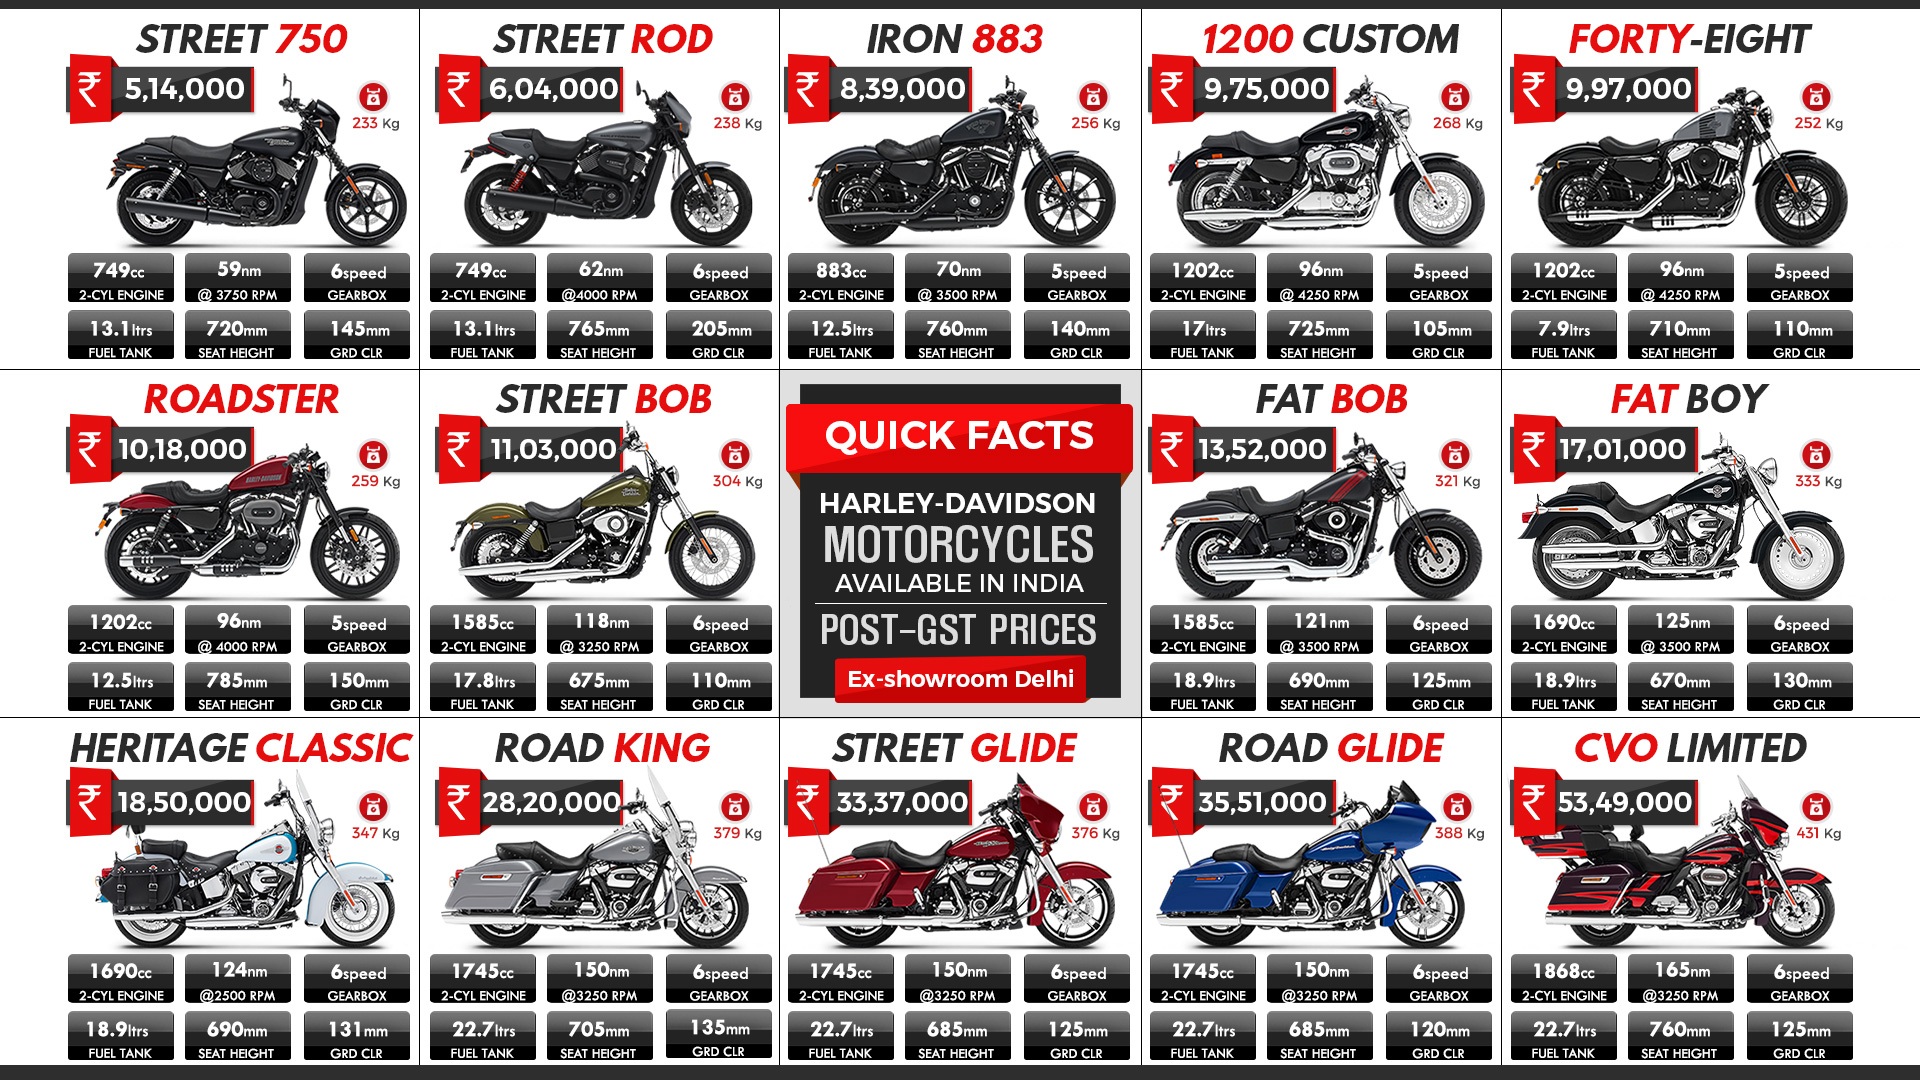 Harley Davidson Motorcycles Available In India Full Lineup Post Gst Price List